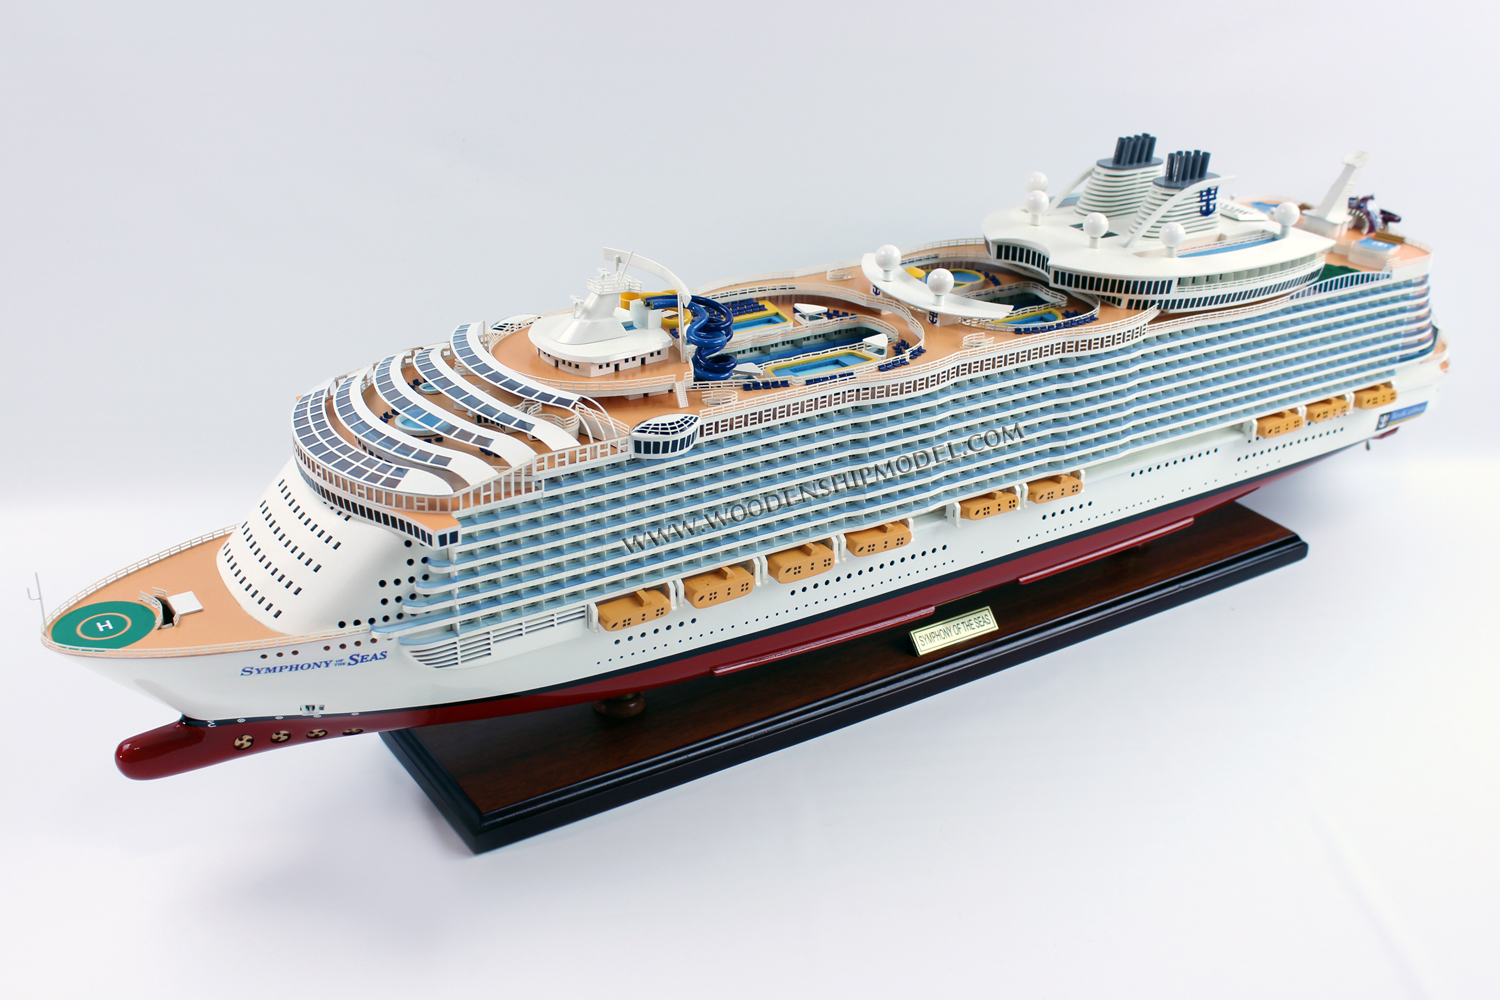 Ship model Symphony of the Seas ready for display, scale Symphony of the Seas model ship, ship model Symphony of the Seas, wooden ship model Symphony of the Seas, hand-made ship model Symphony of the Seas with lights, display ship model Symphony of the Seas, Symphony of the Seas model, woodenshipmodel, woodenmodelboat, gianhien, gia nhien co., ltd, gia nhien co model boat and ship builder